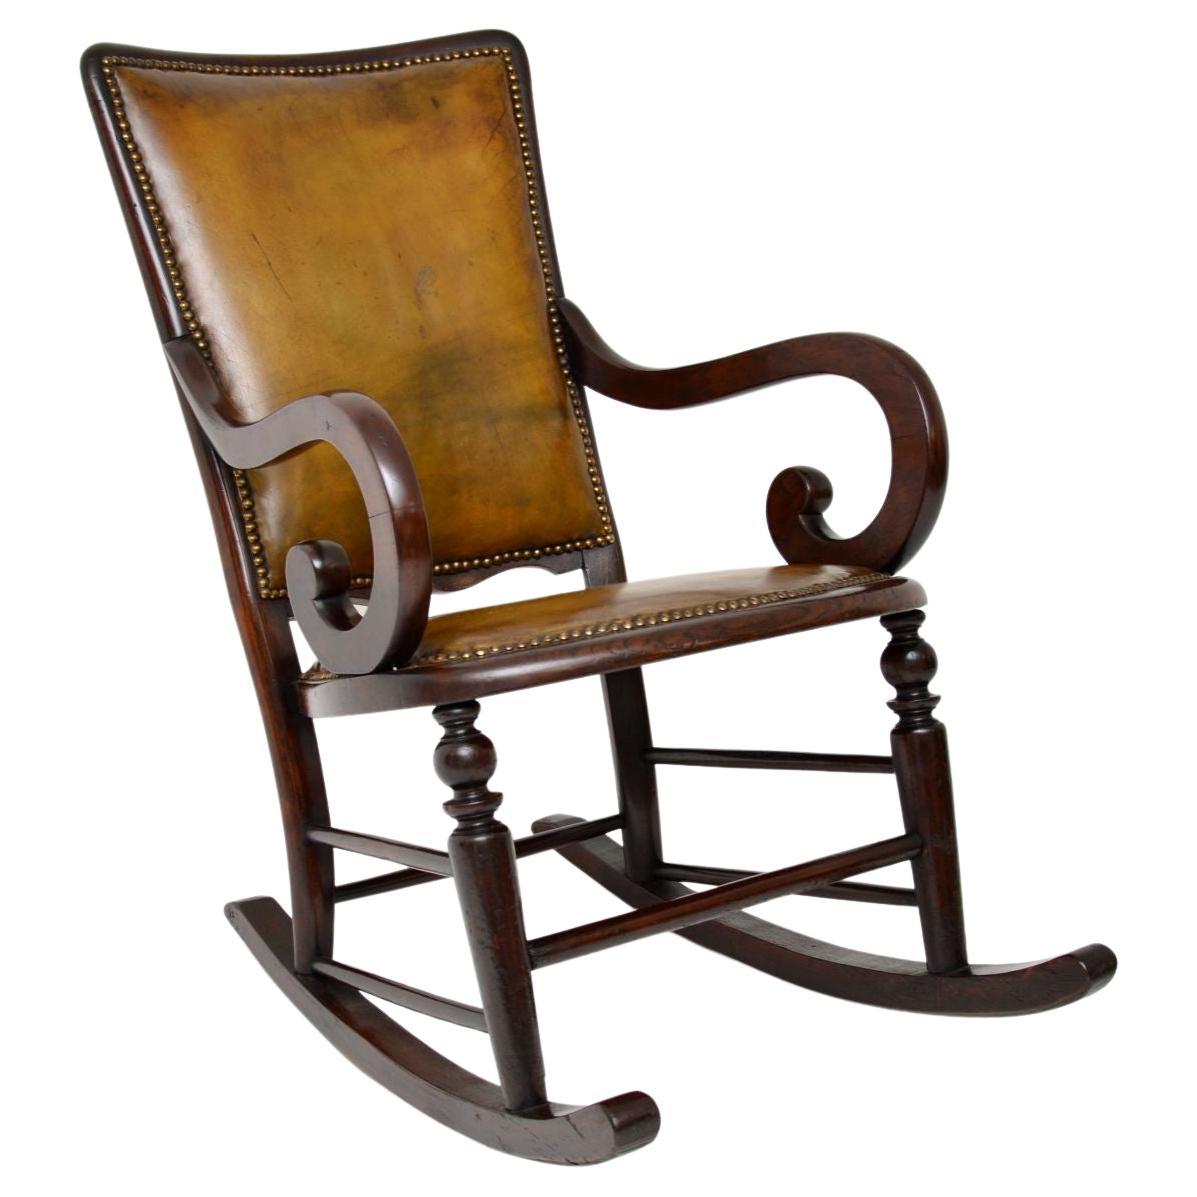 Antique Victorian Leather Rocking Chair For Sale